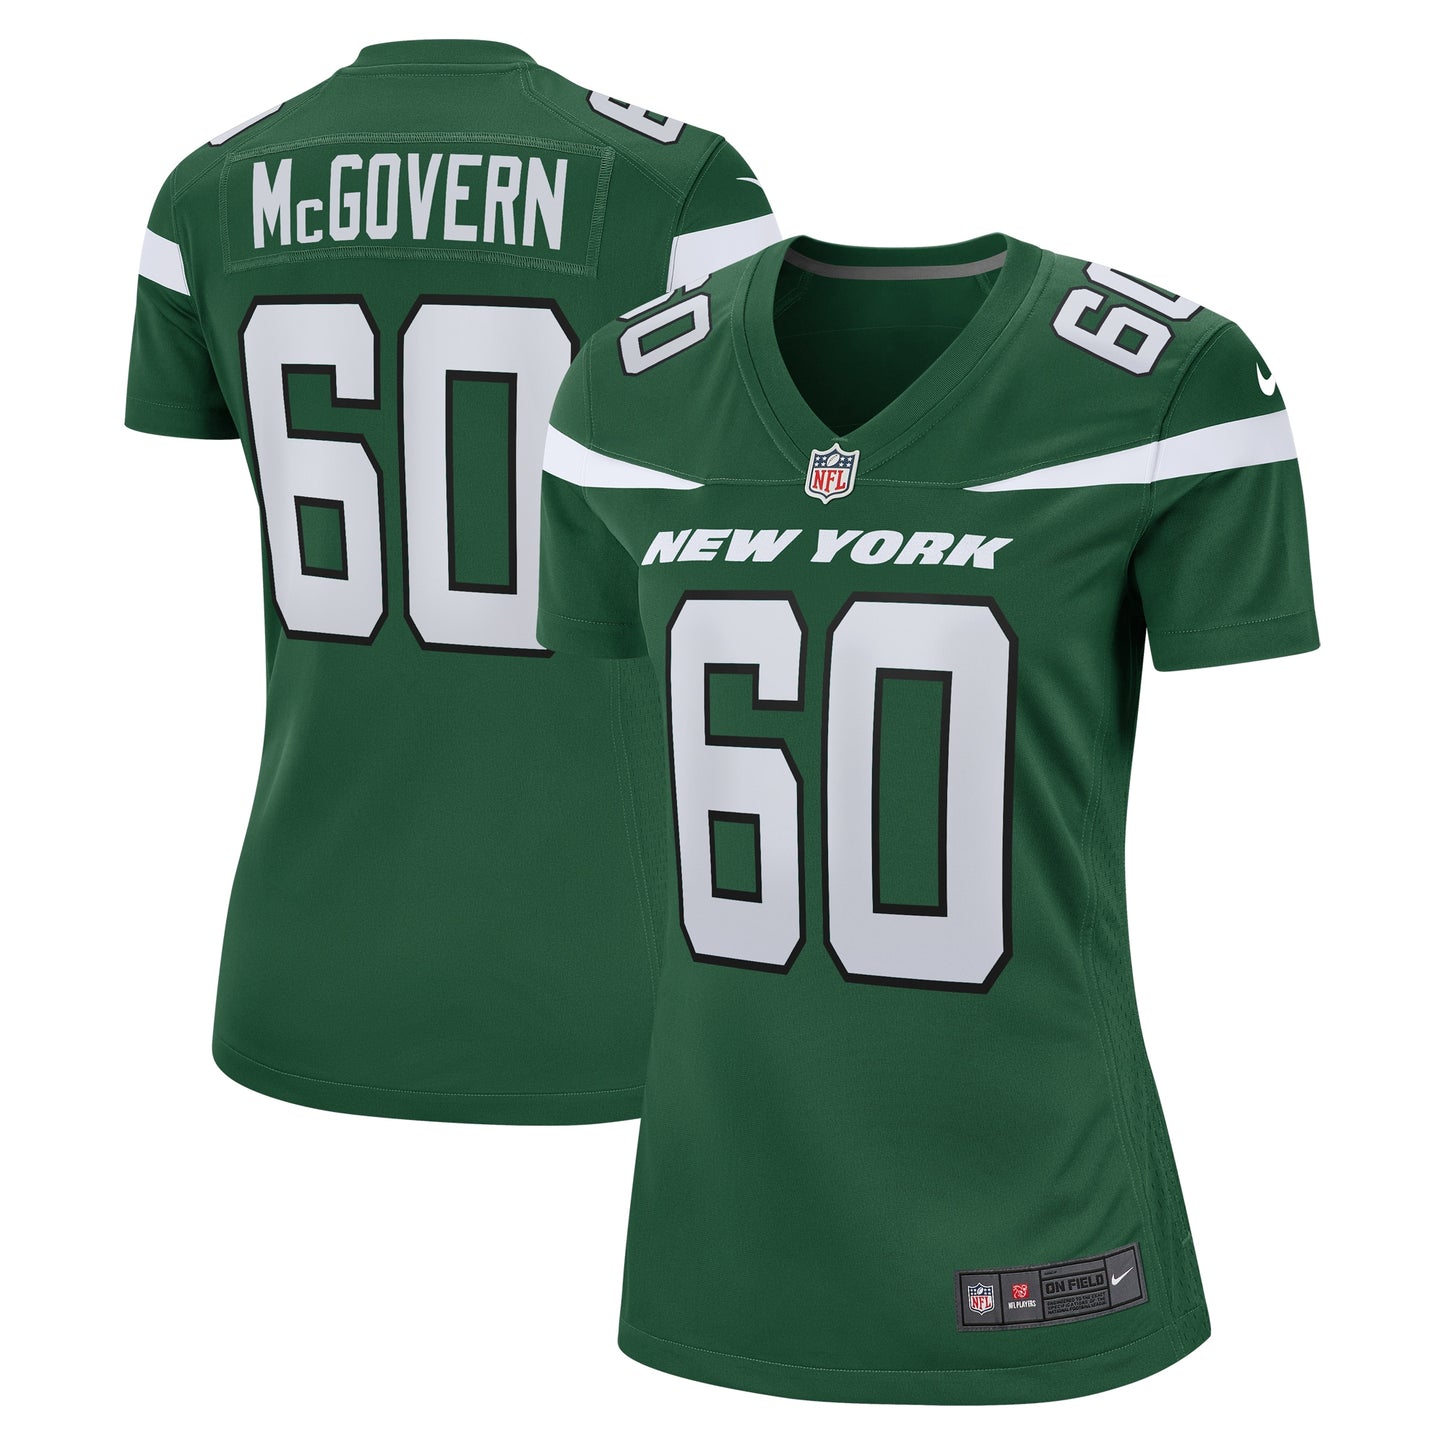 Connor McGovern New York Jets Nike Women's Game Jersey - Gotham Green